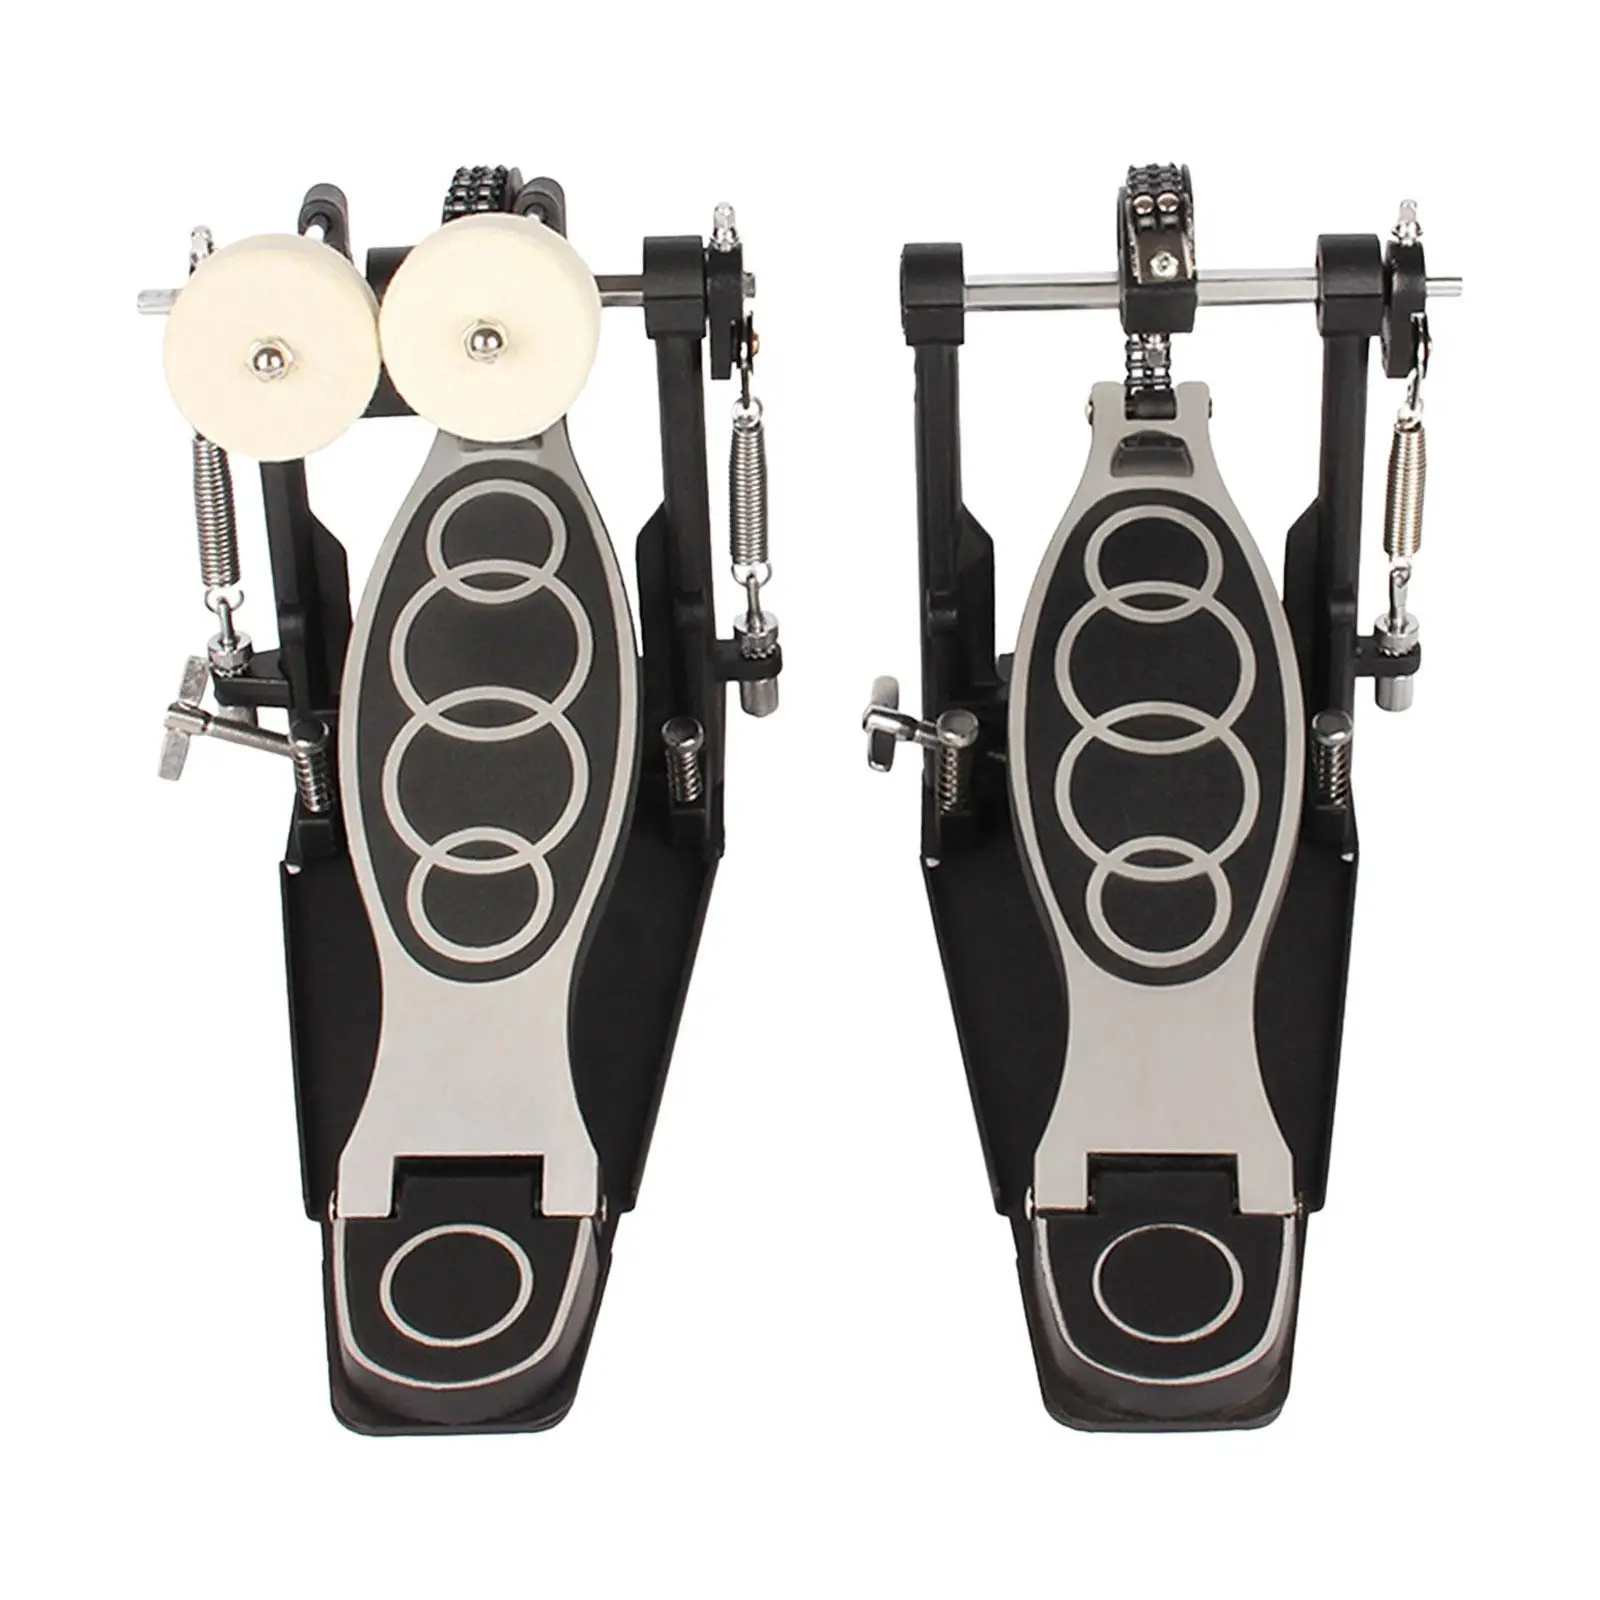 Dual Pedal Two Chain Drive Percussion Hardware Twin Drum Pedal for Drummers Electronic Drum Lovers Jazz Drums Kick Drum Set